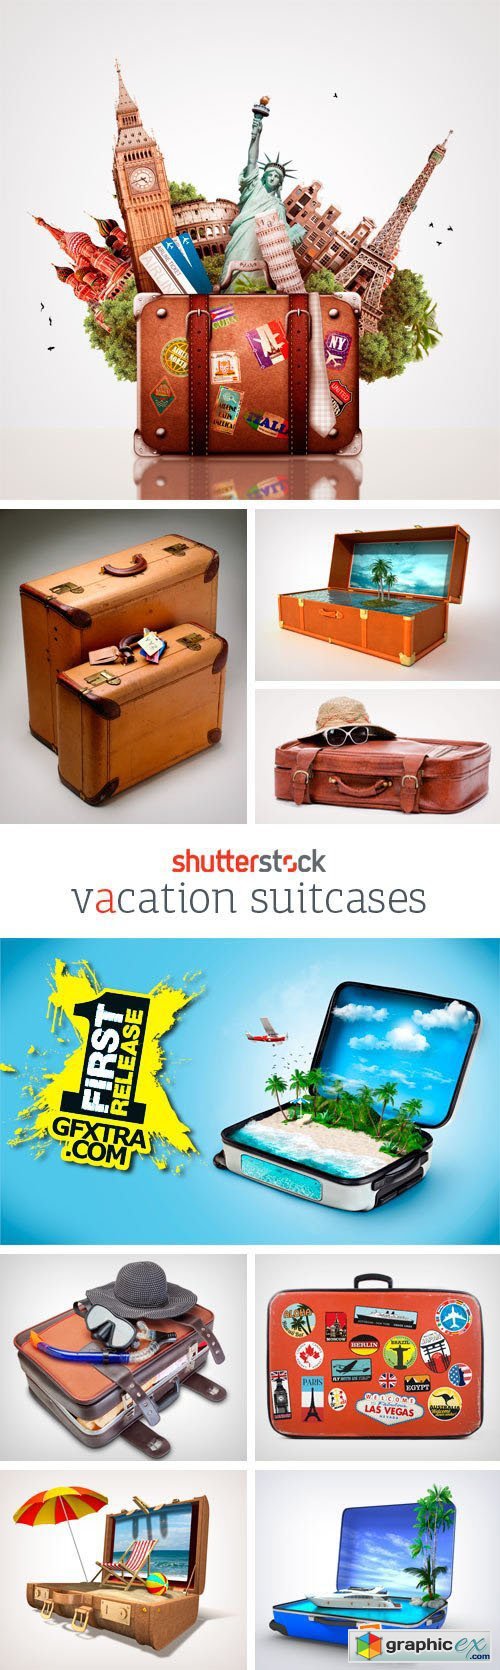 Amazing SS - Vacation Suitcases, 25xJPGs